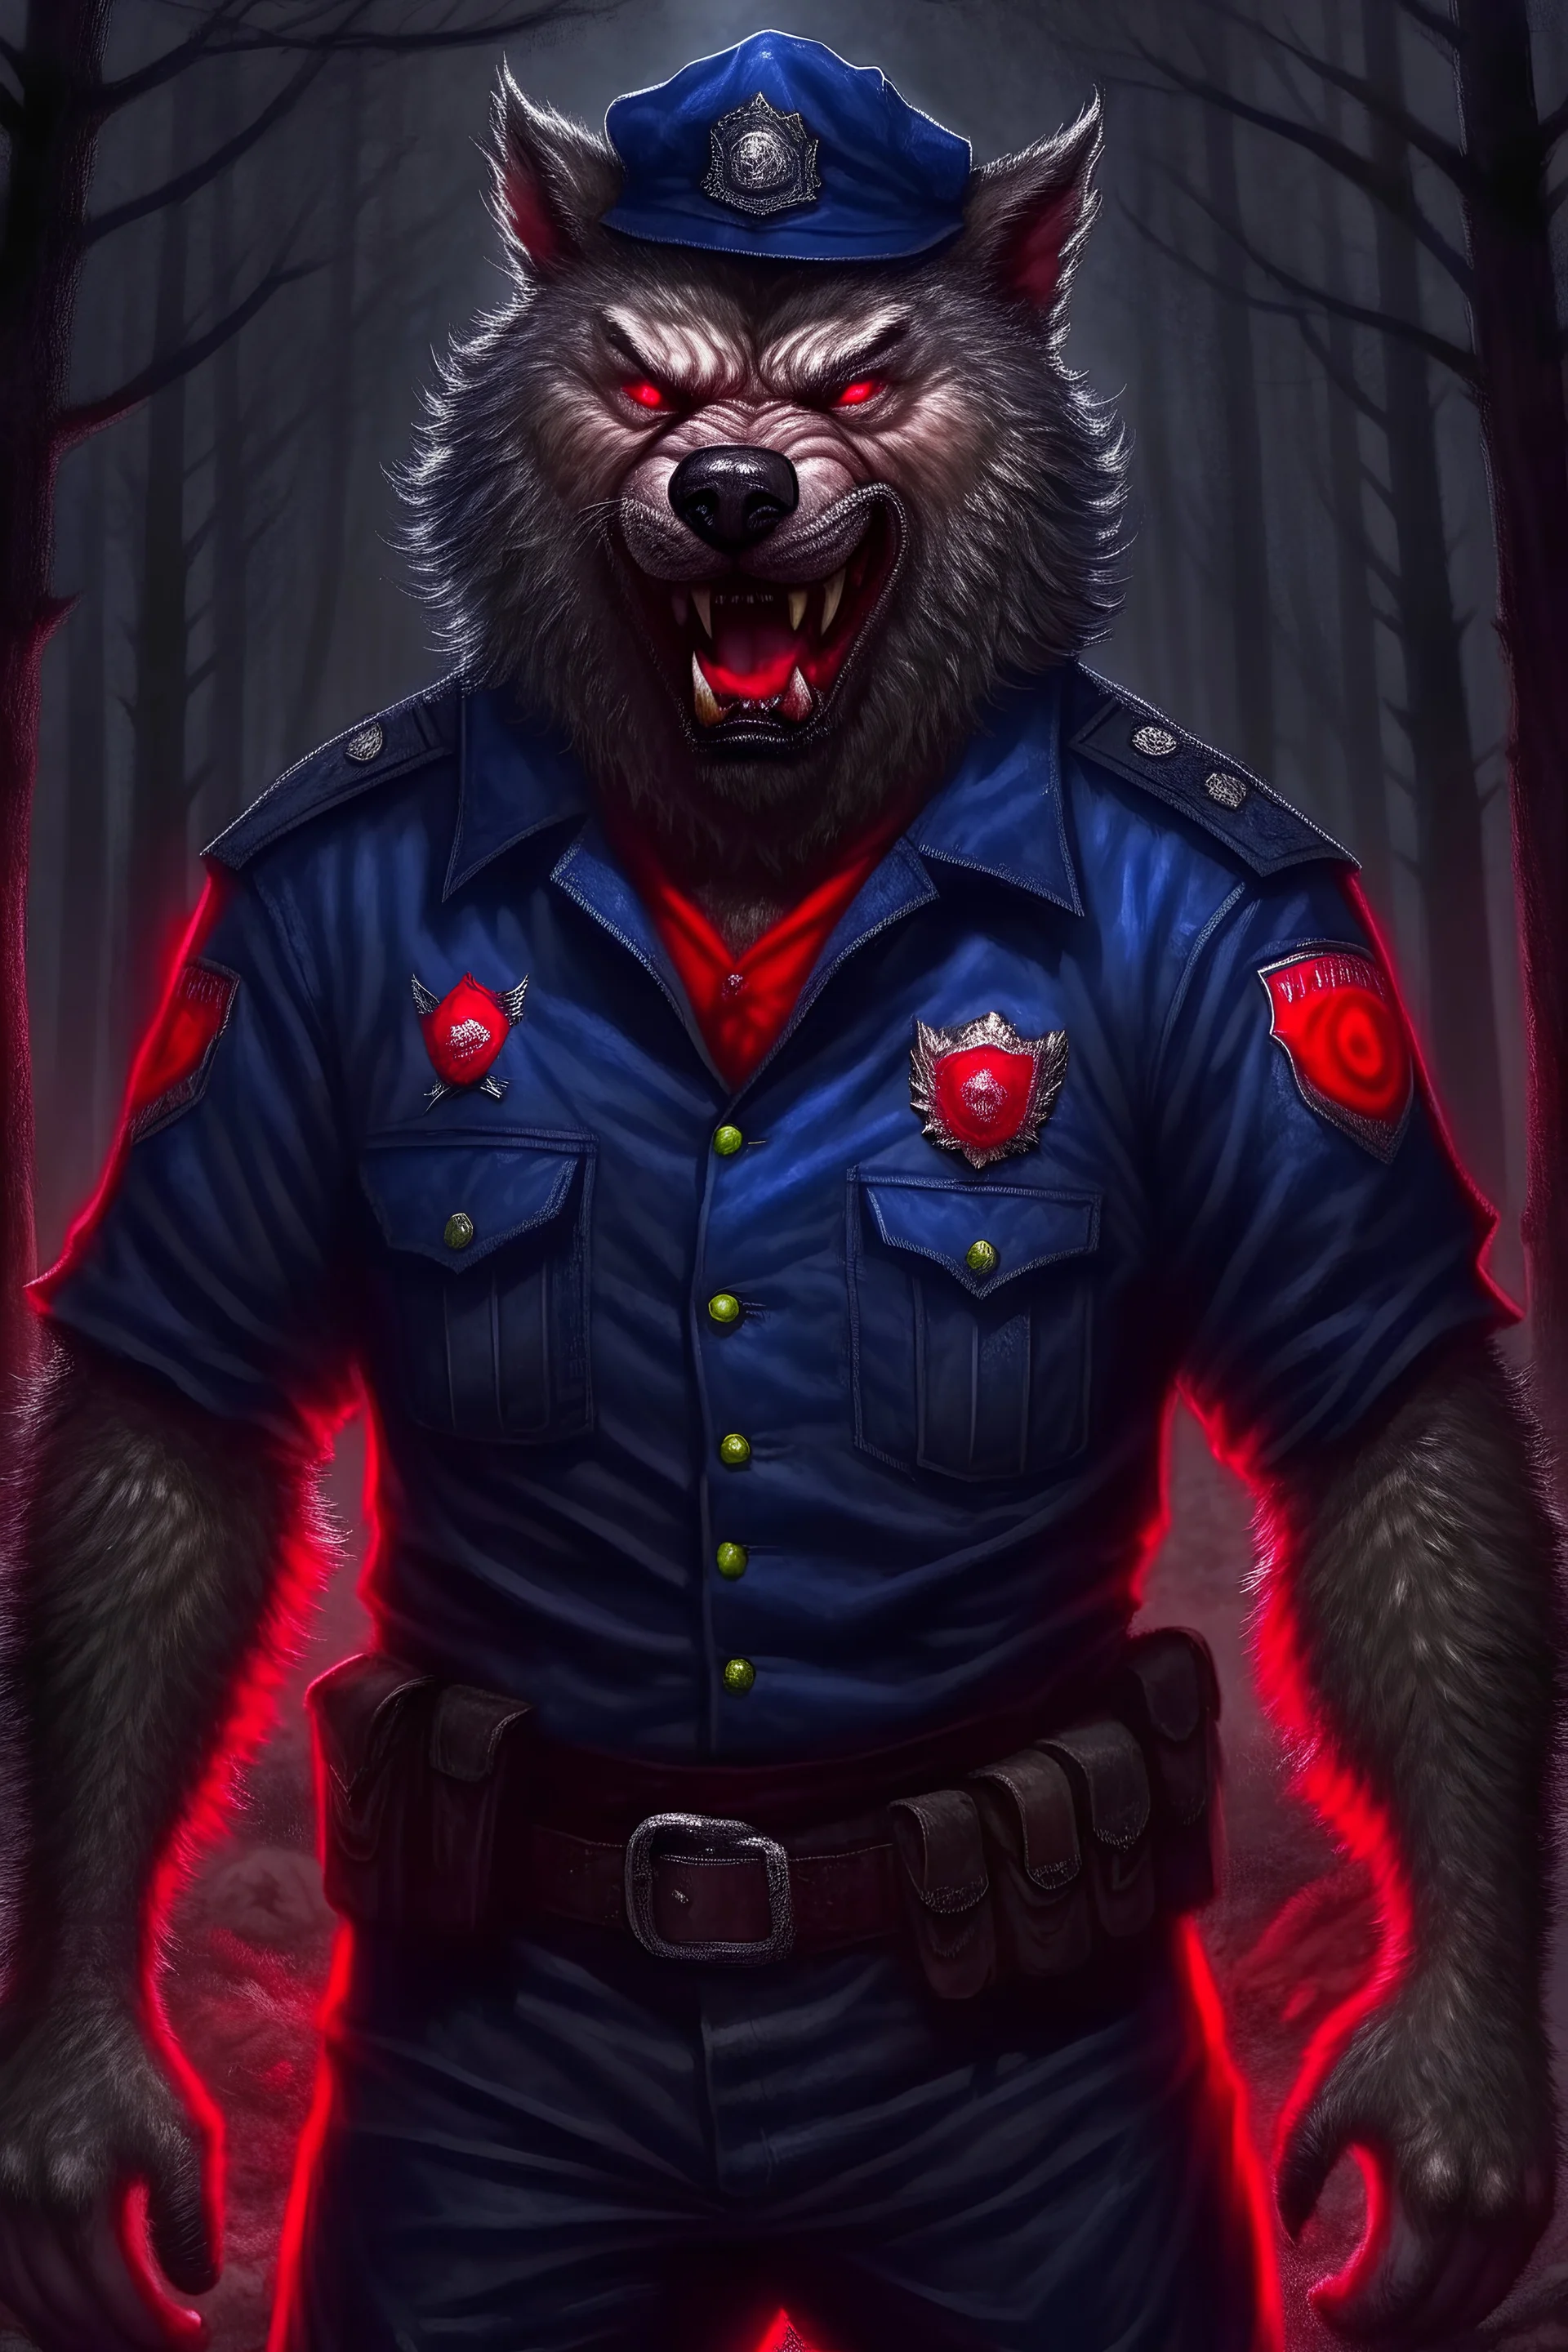 130 kg angry werewolf in a cop uniform with blood in the woods belgium realism